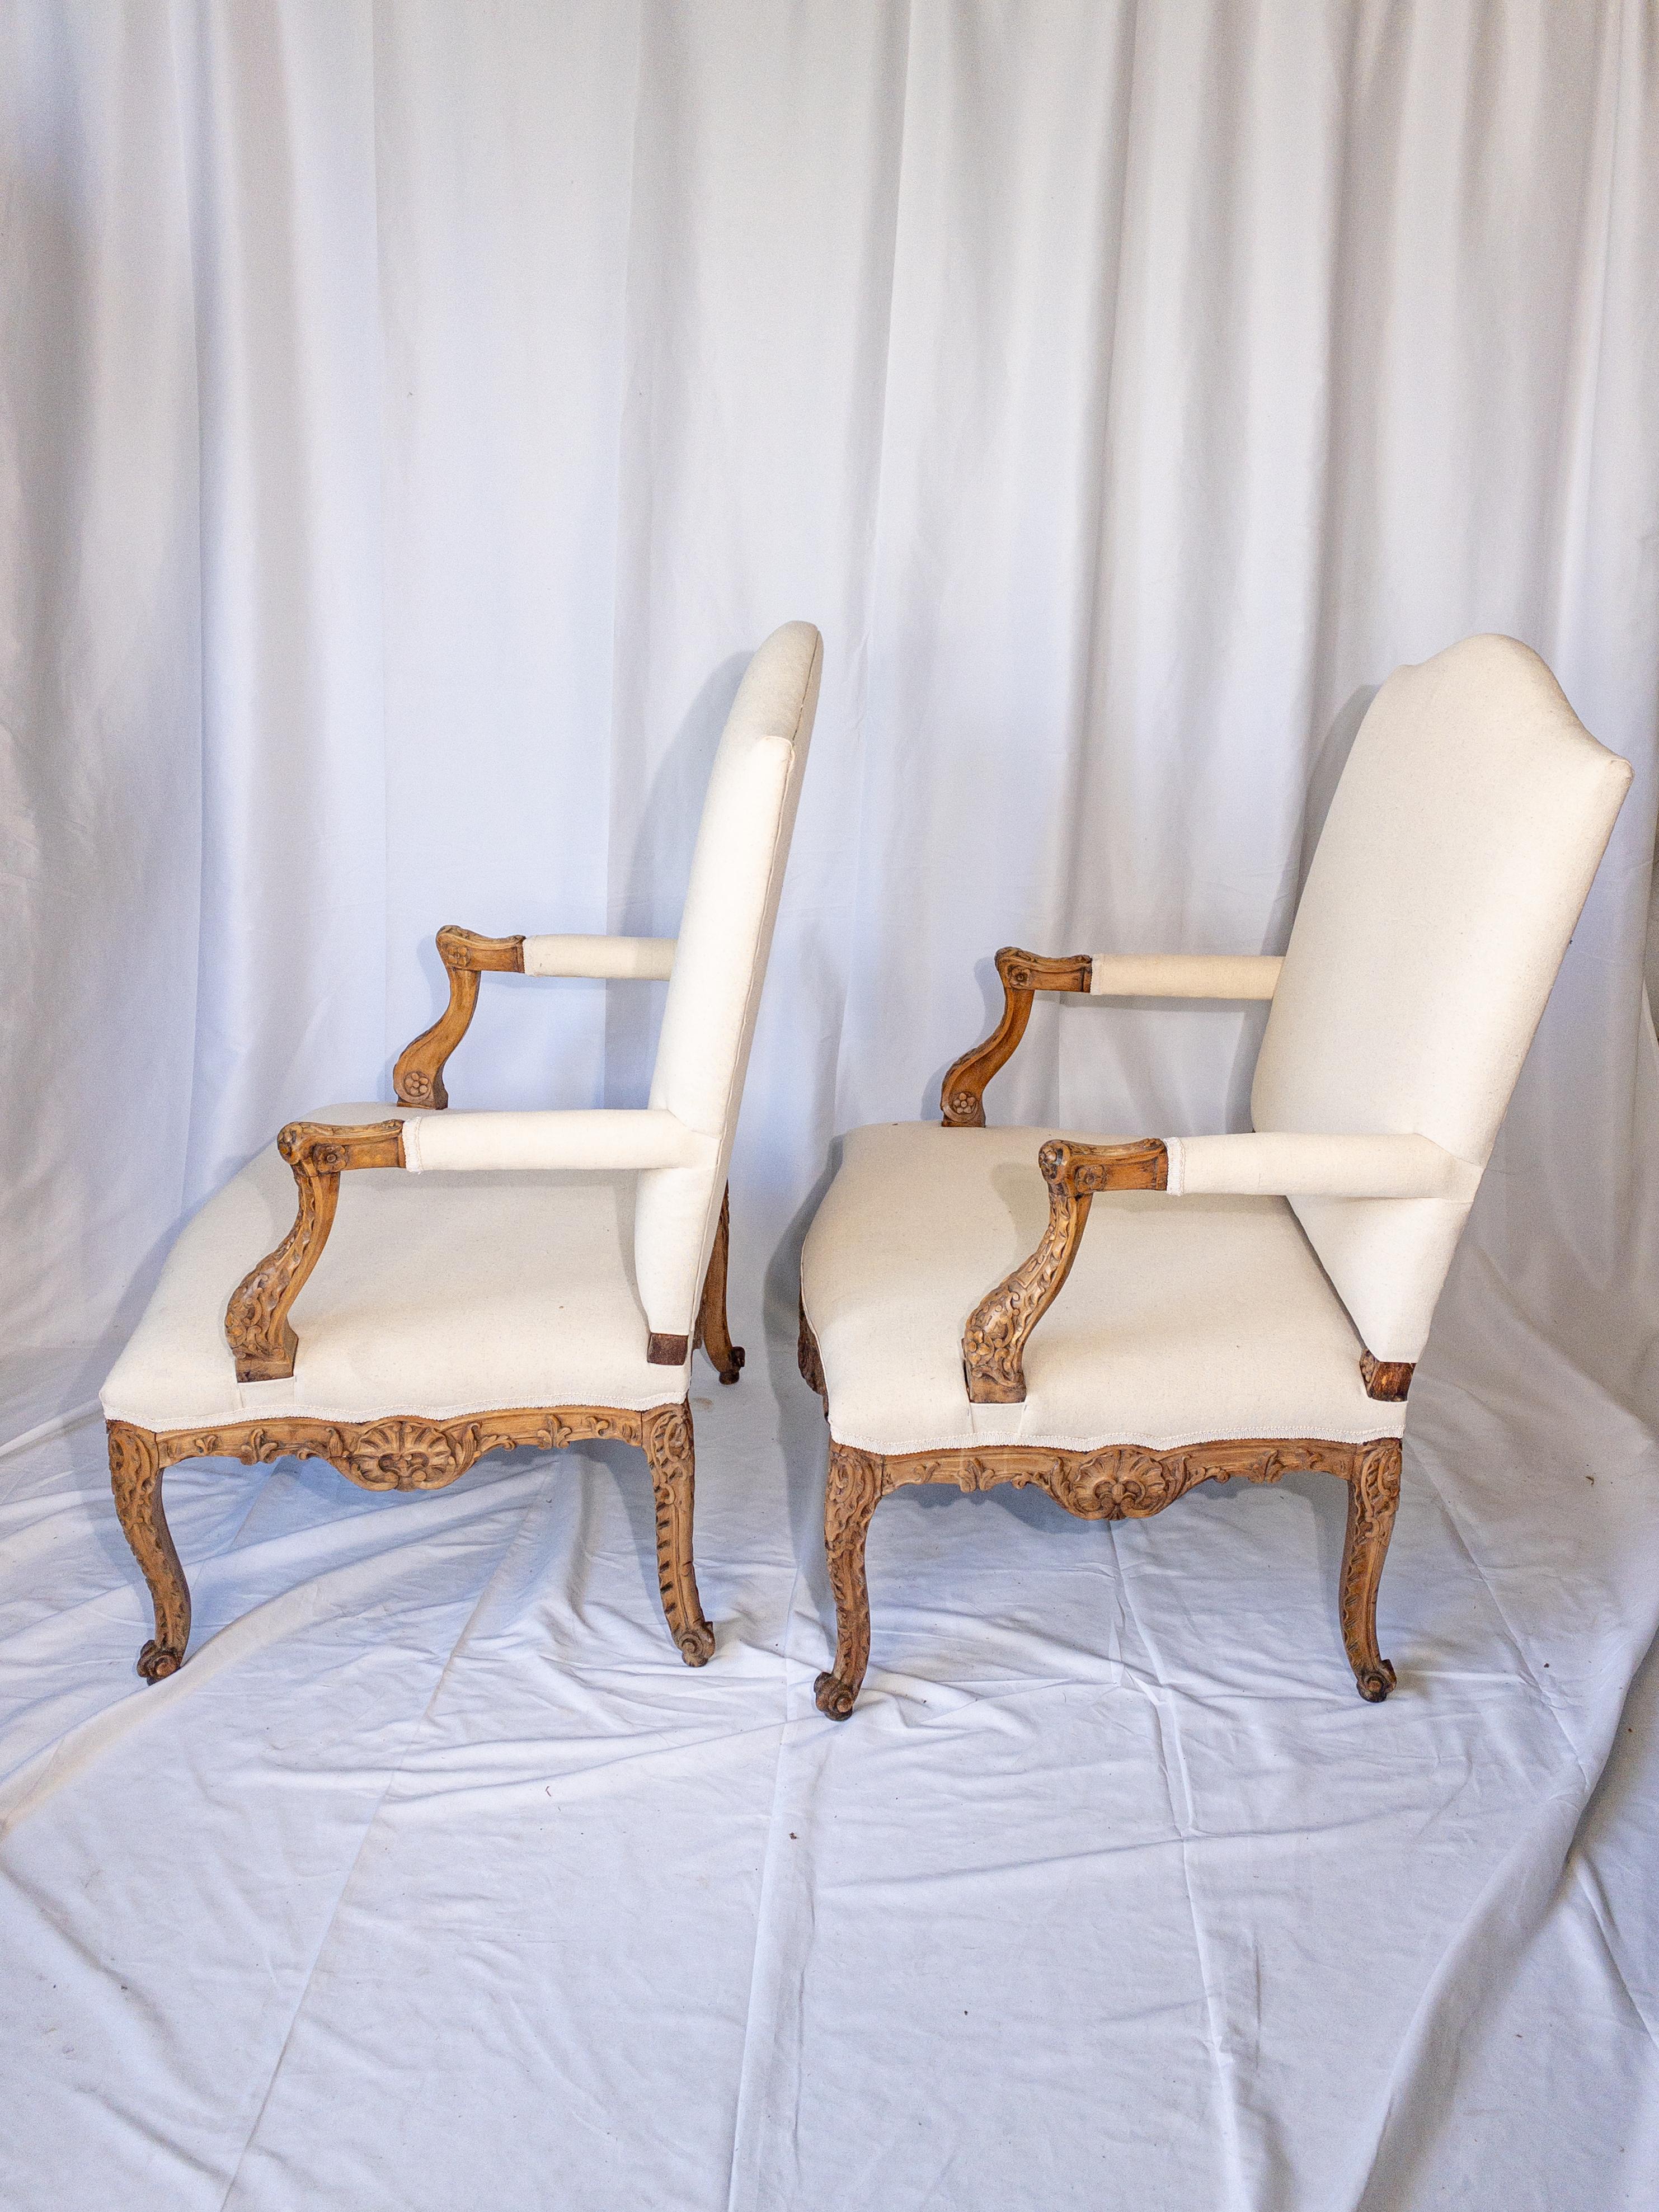 Pair of 19th Century French Louis XV Style Carved Wooden Arm Chairs For Sale 2